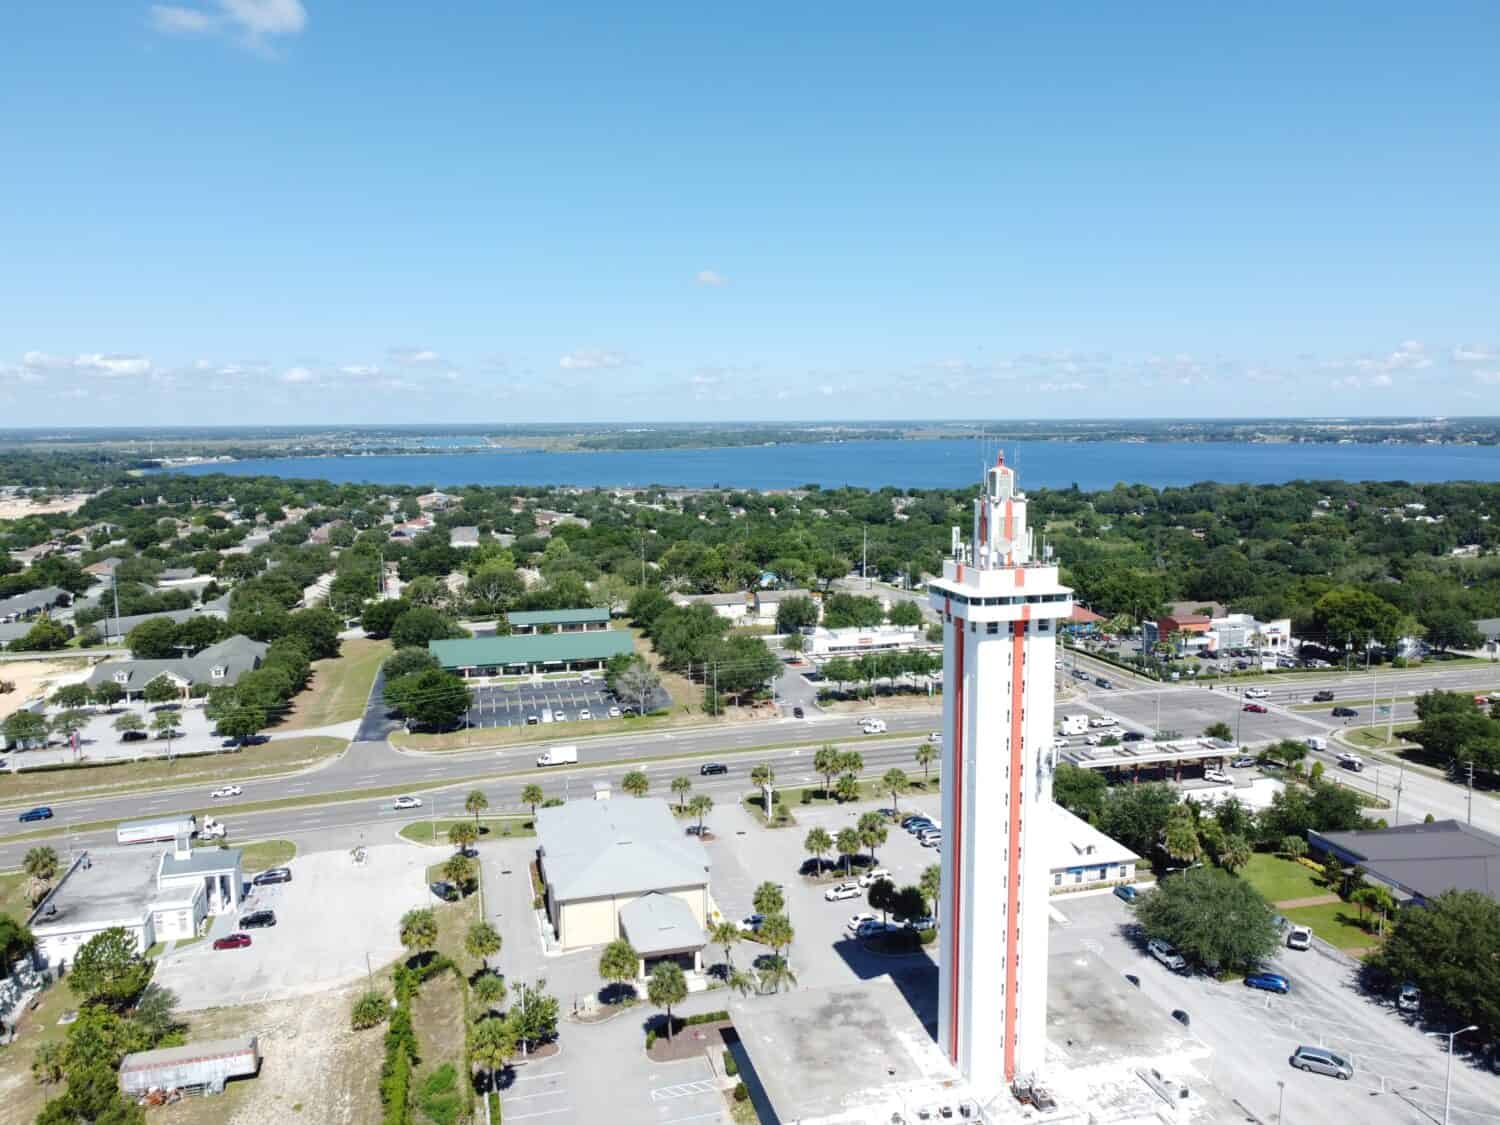 The Citrus Tower over Clermont Florida